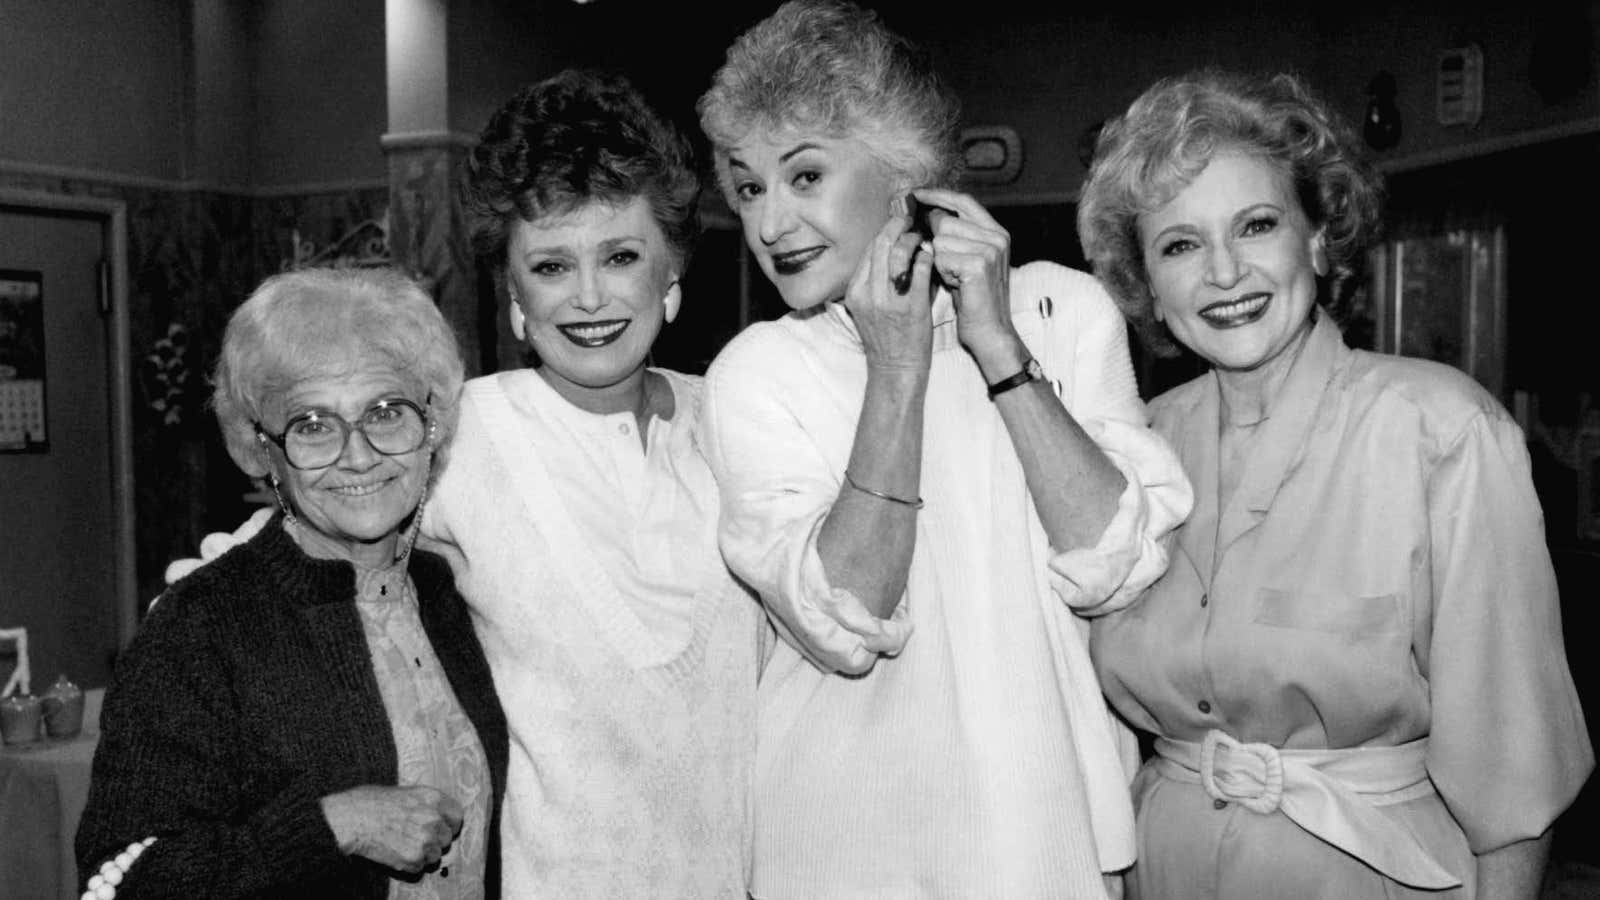 The Golden Girls were ahead of their time.